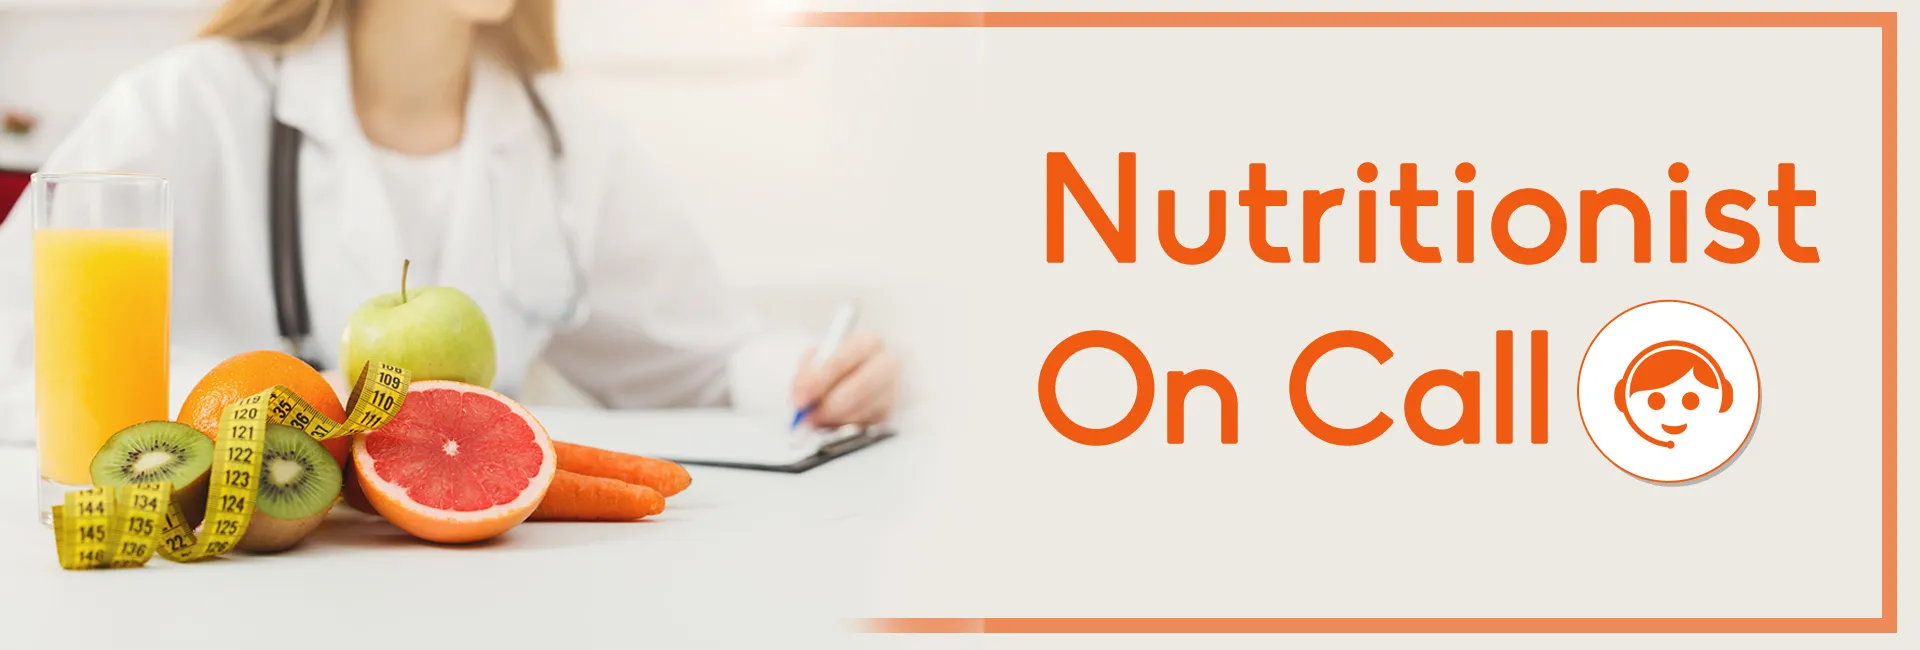 Nutritionist On Call In Charlottetown